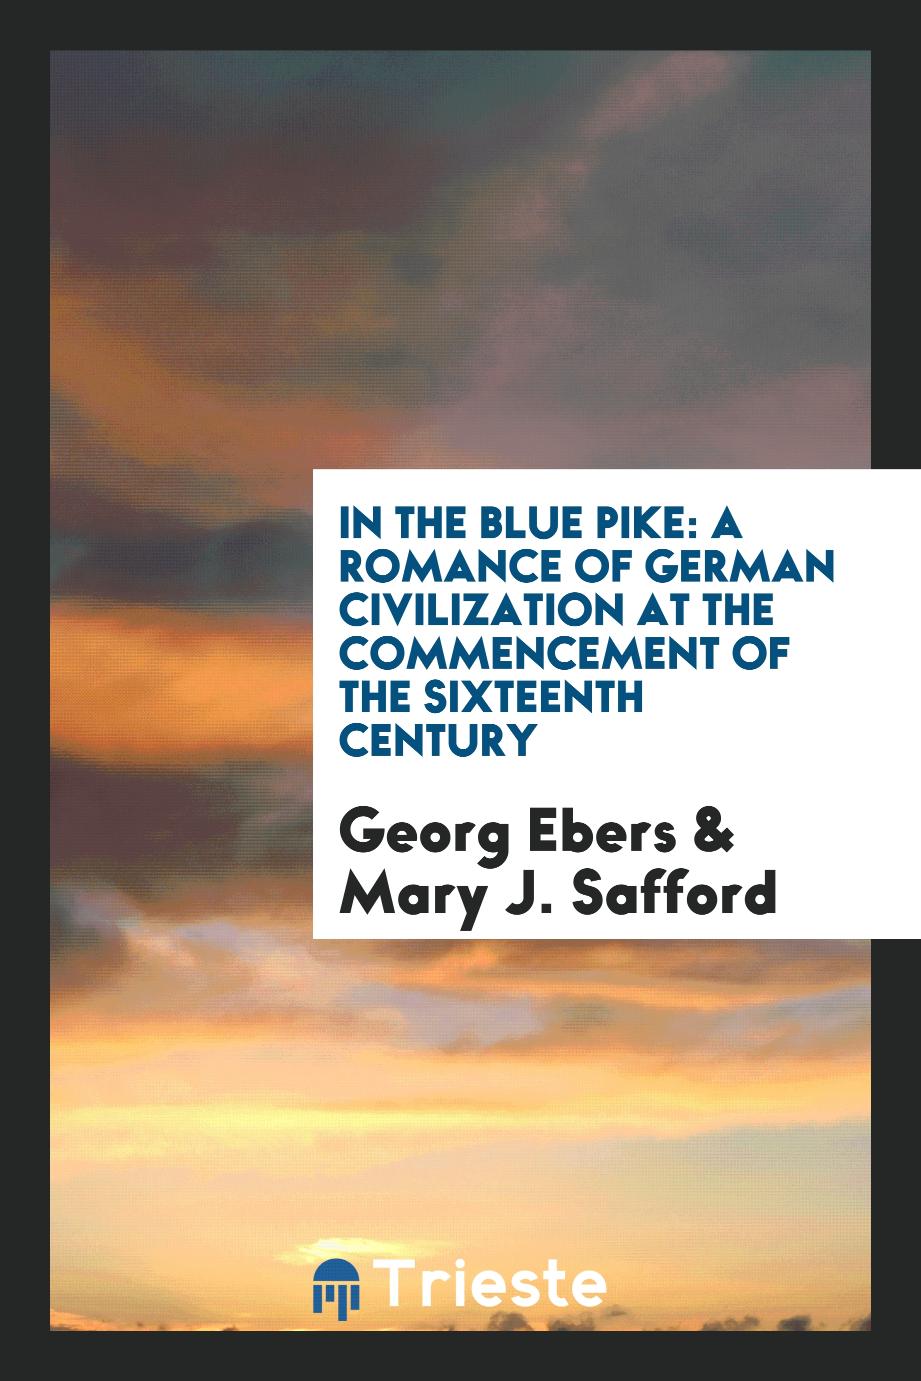 In the Blue Pike: A Romance of German Civilization at the Commencement of the Sixteenth Century